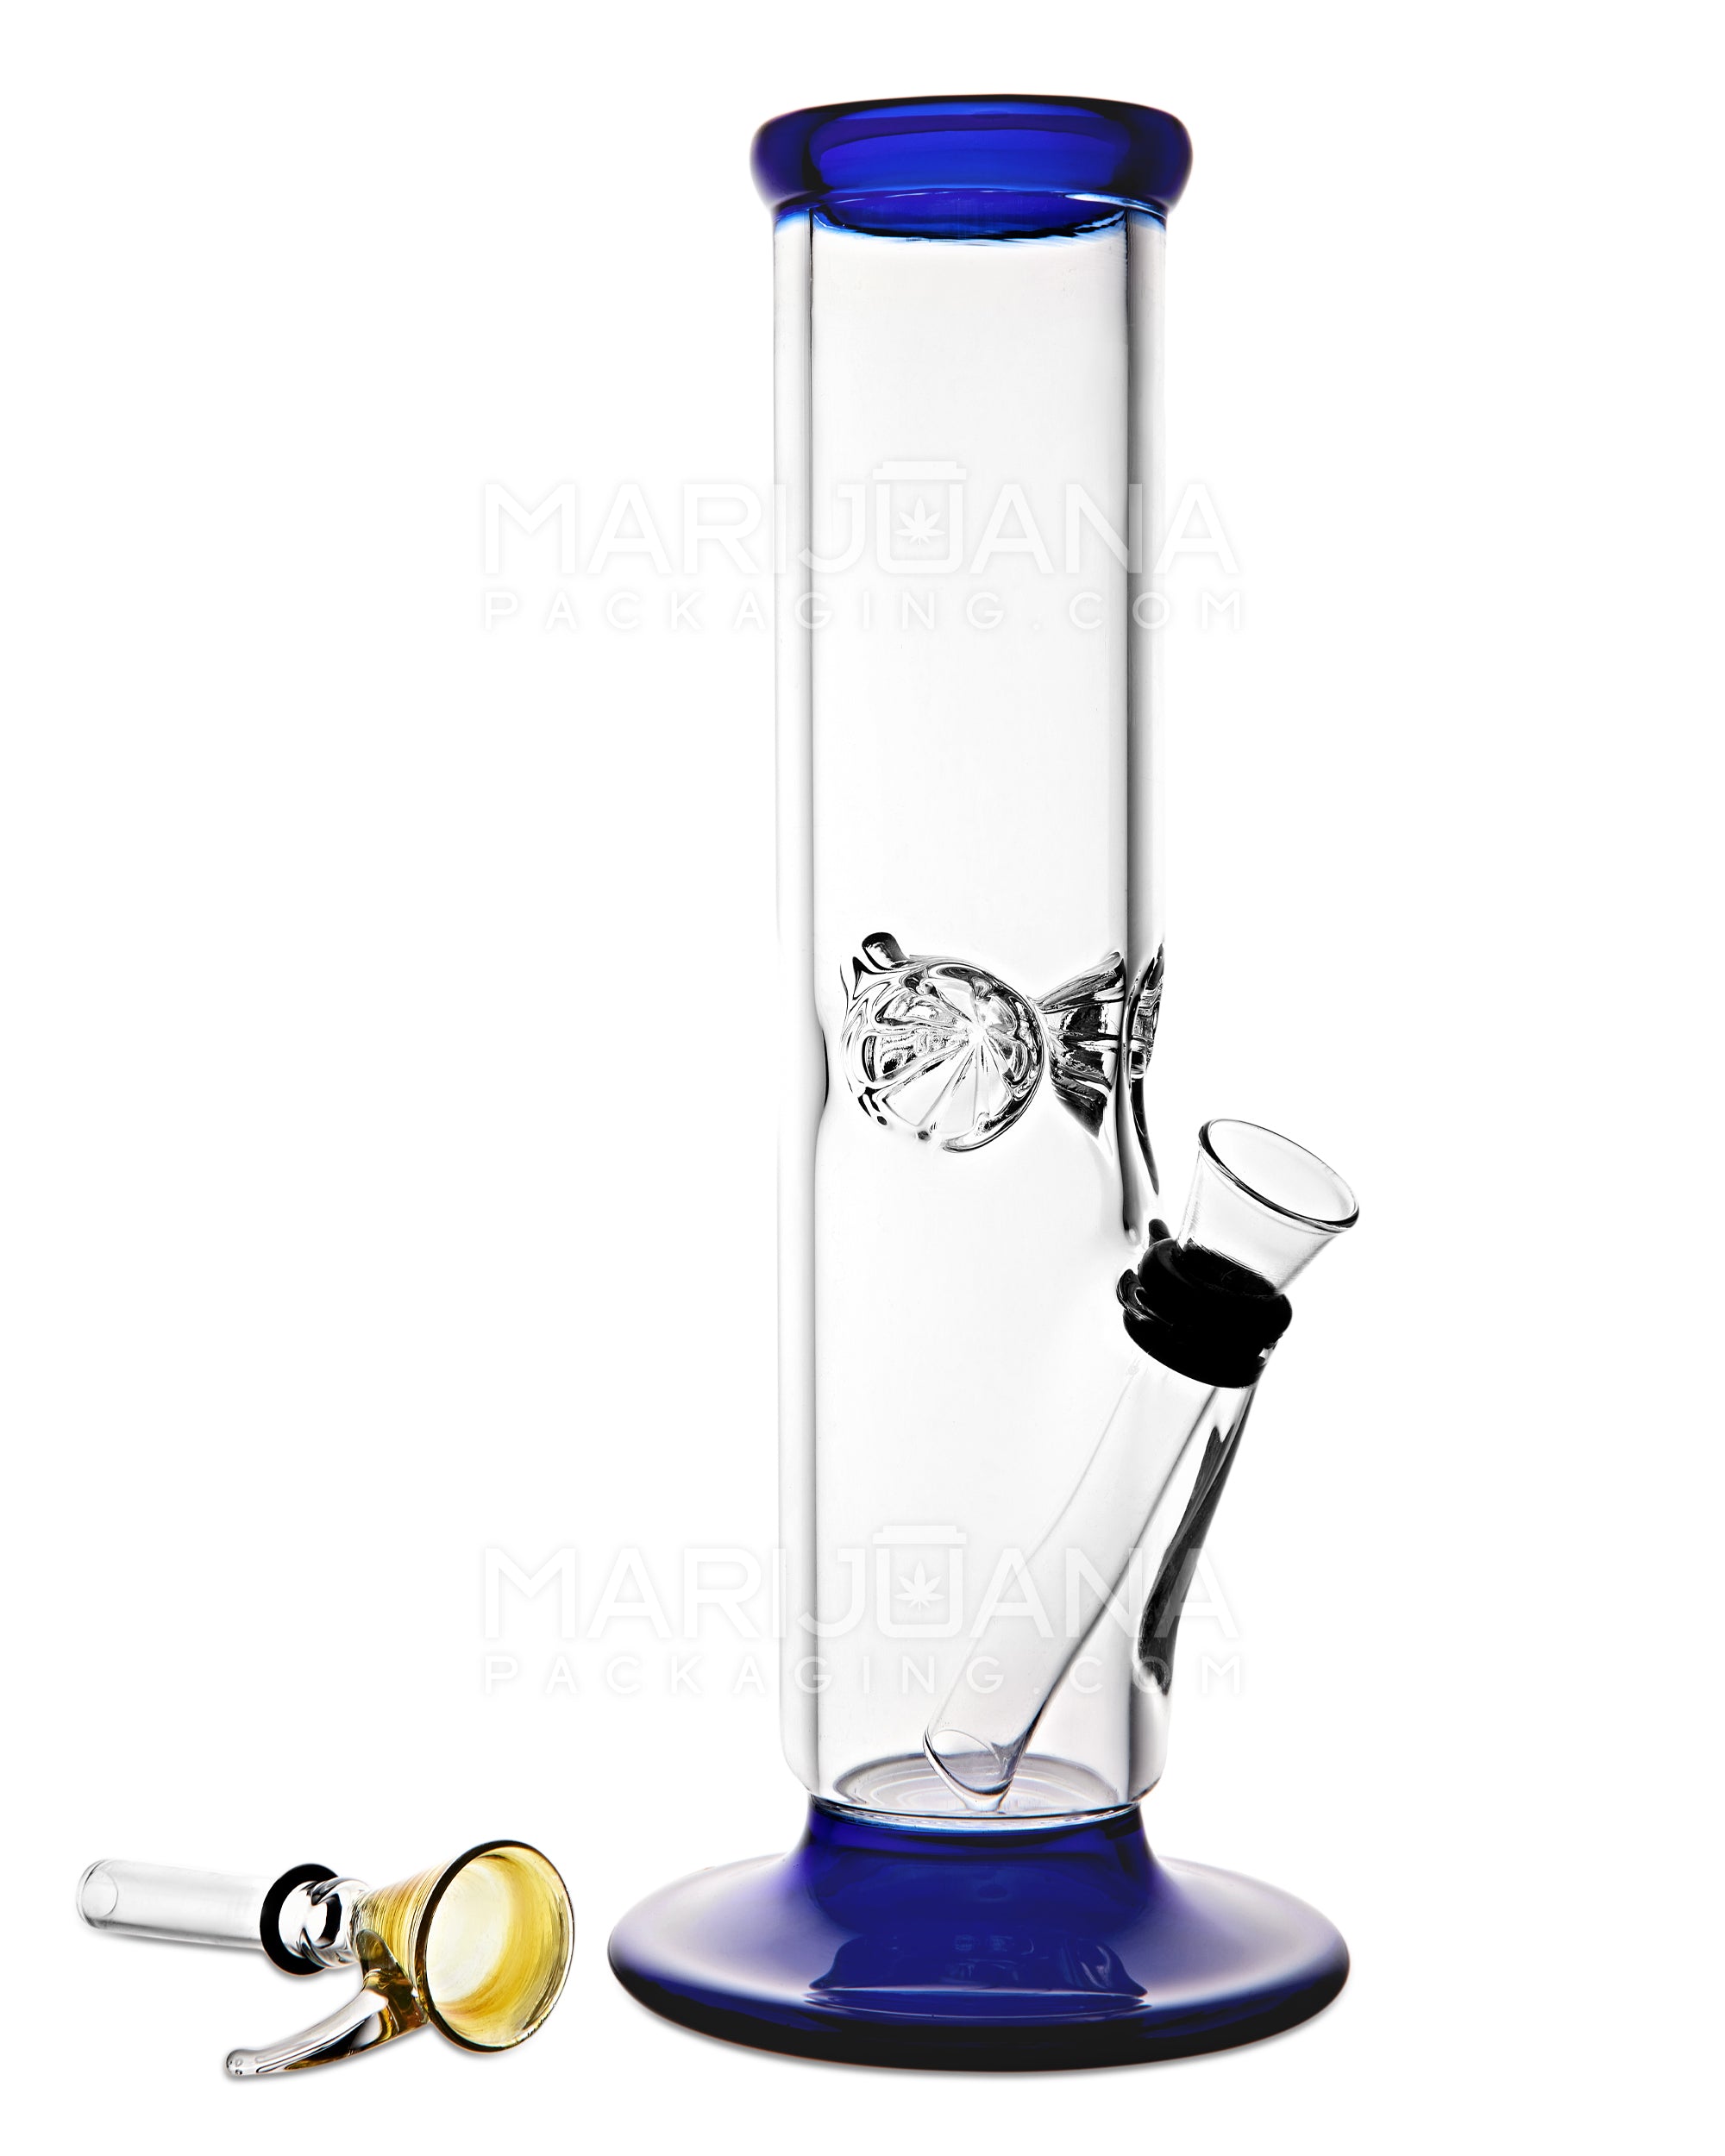 USA Glass | Straight Glass Water Pipe w/ Ice Catcher | 9in Tall - Grommet Bowl - Blue - 2